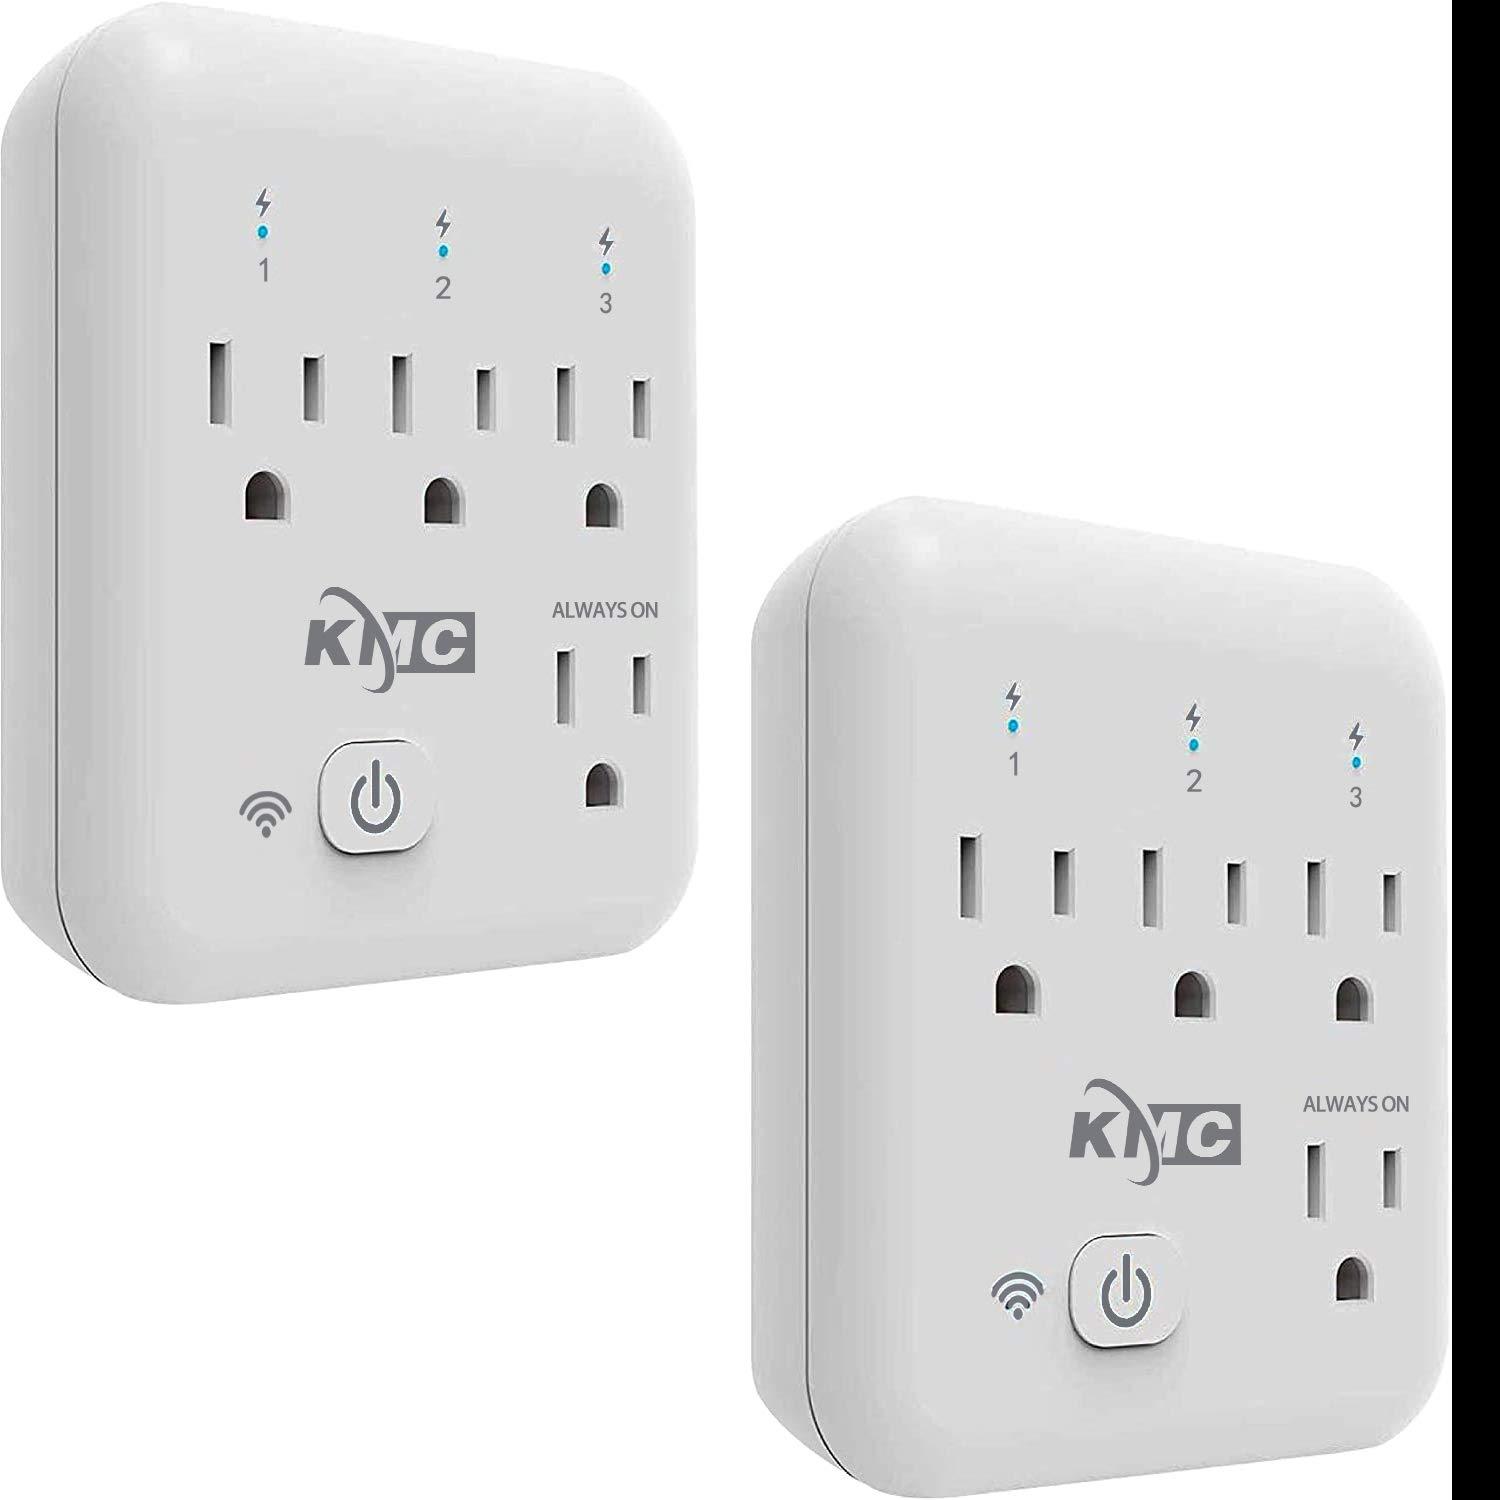 2 KMC 4-Outlet WiFi Mini Smart Plug with Energy Monitoring for $9.49